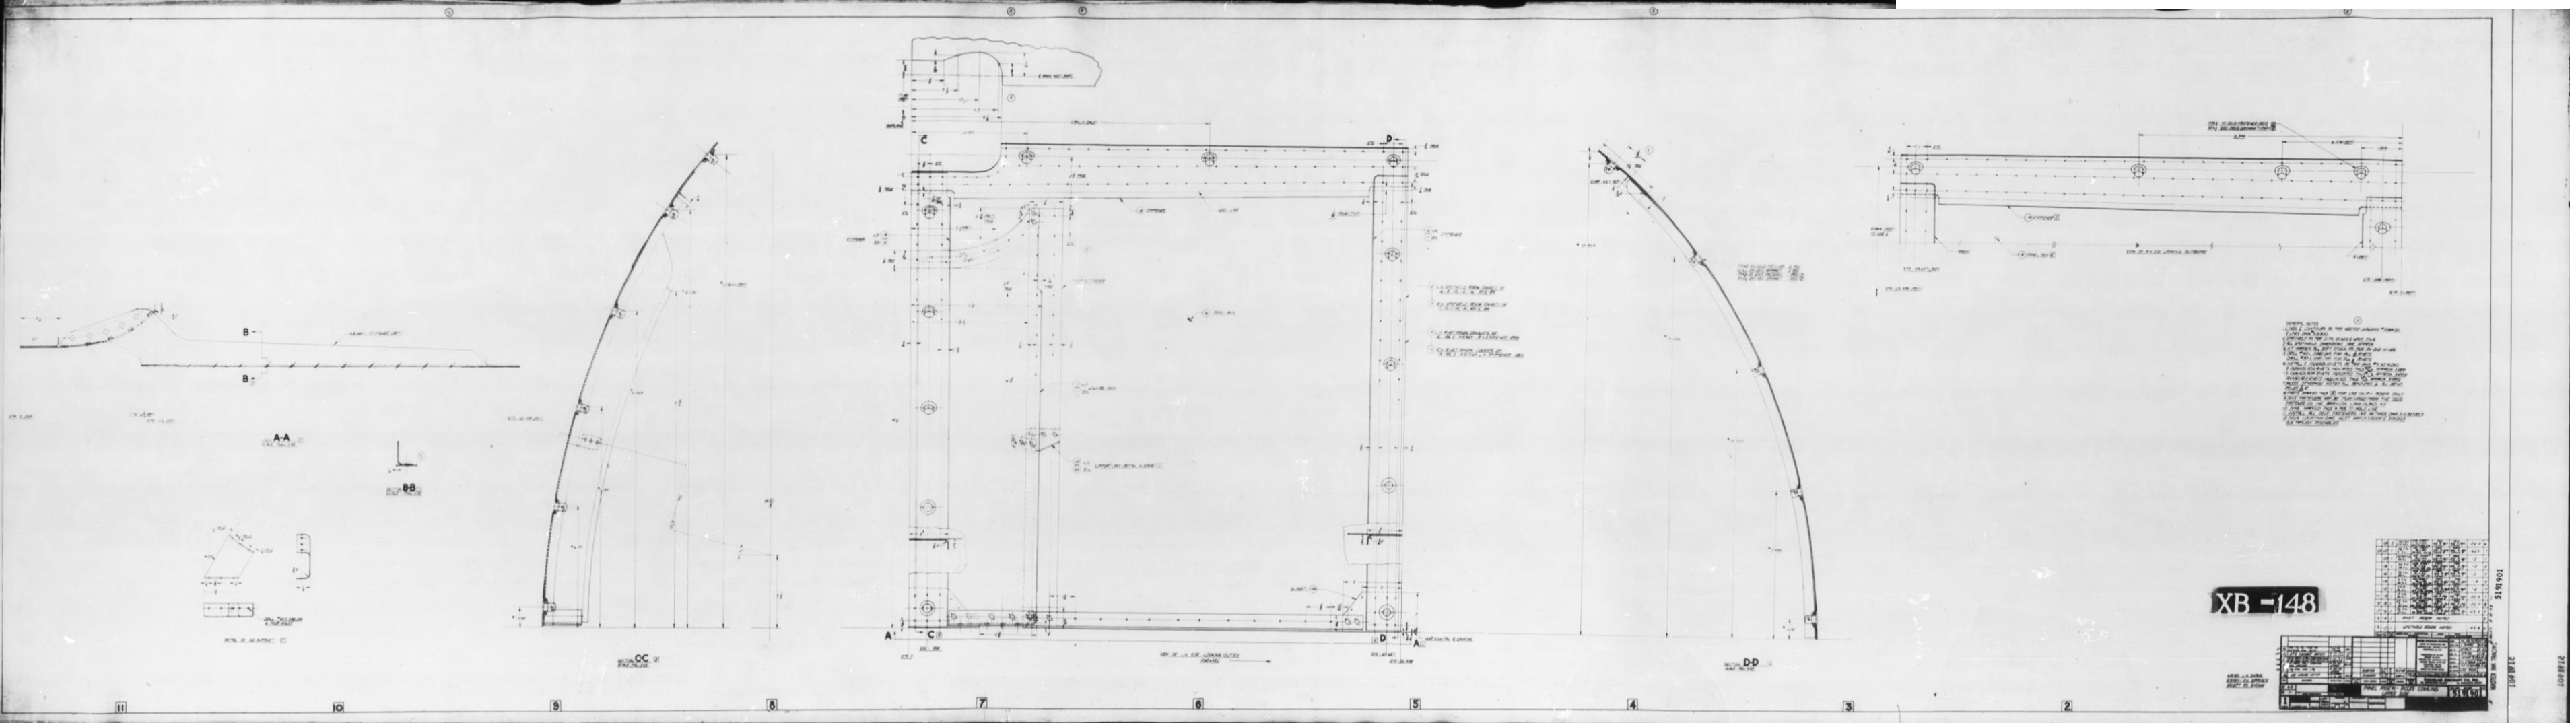 Sbd Cowl Section Drawing 5191901